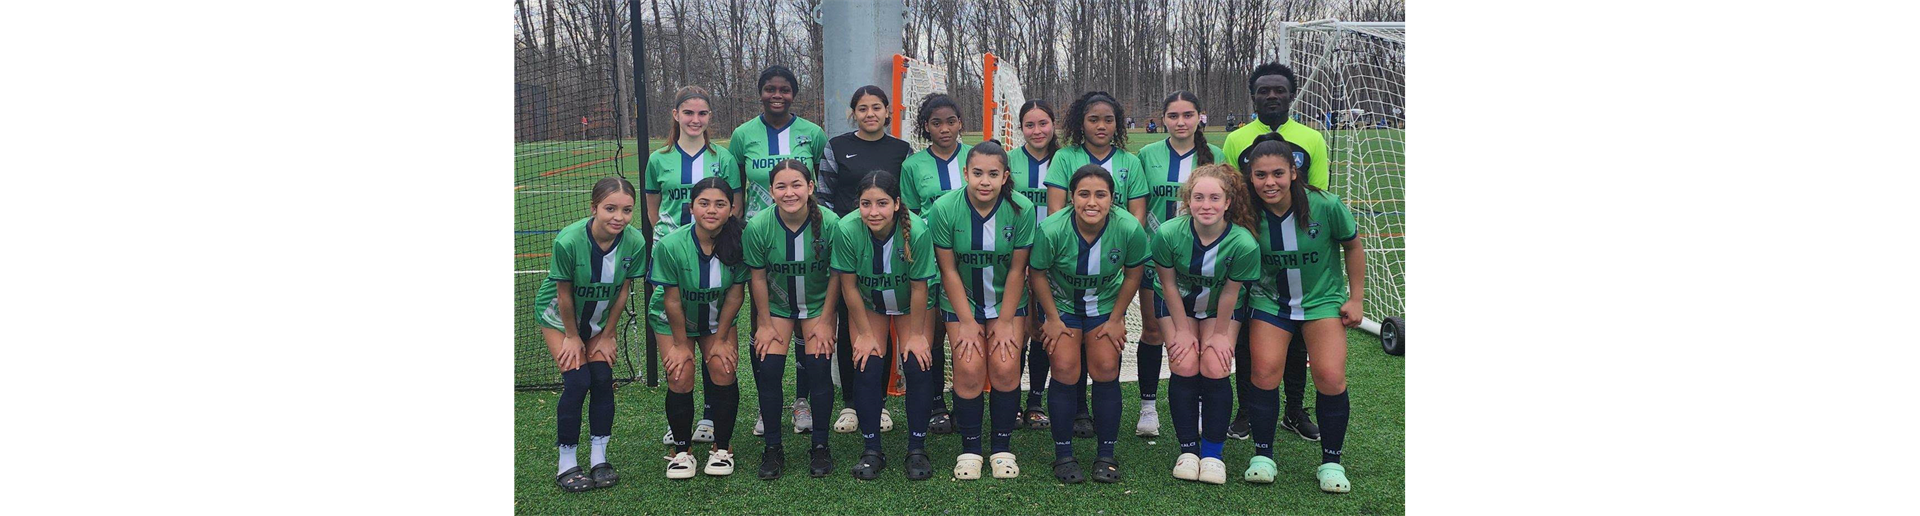 2006 Girls - 1st year team Finishes 10th in VA